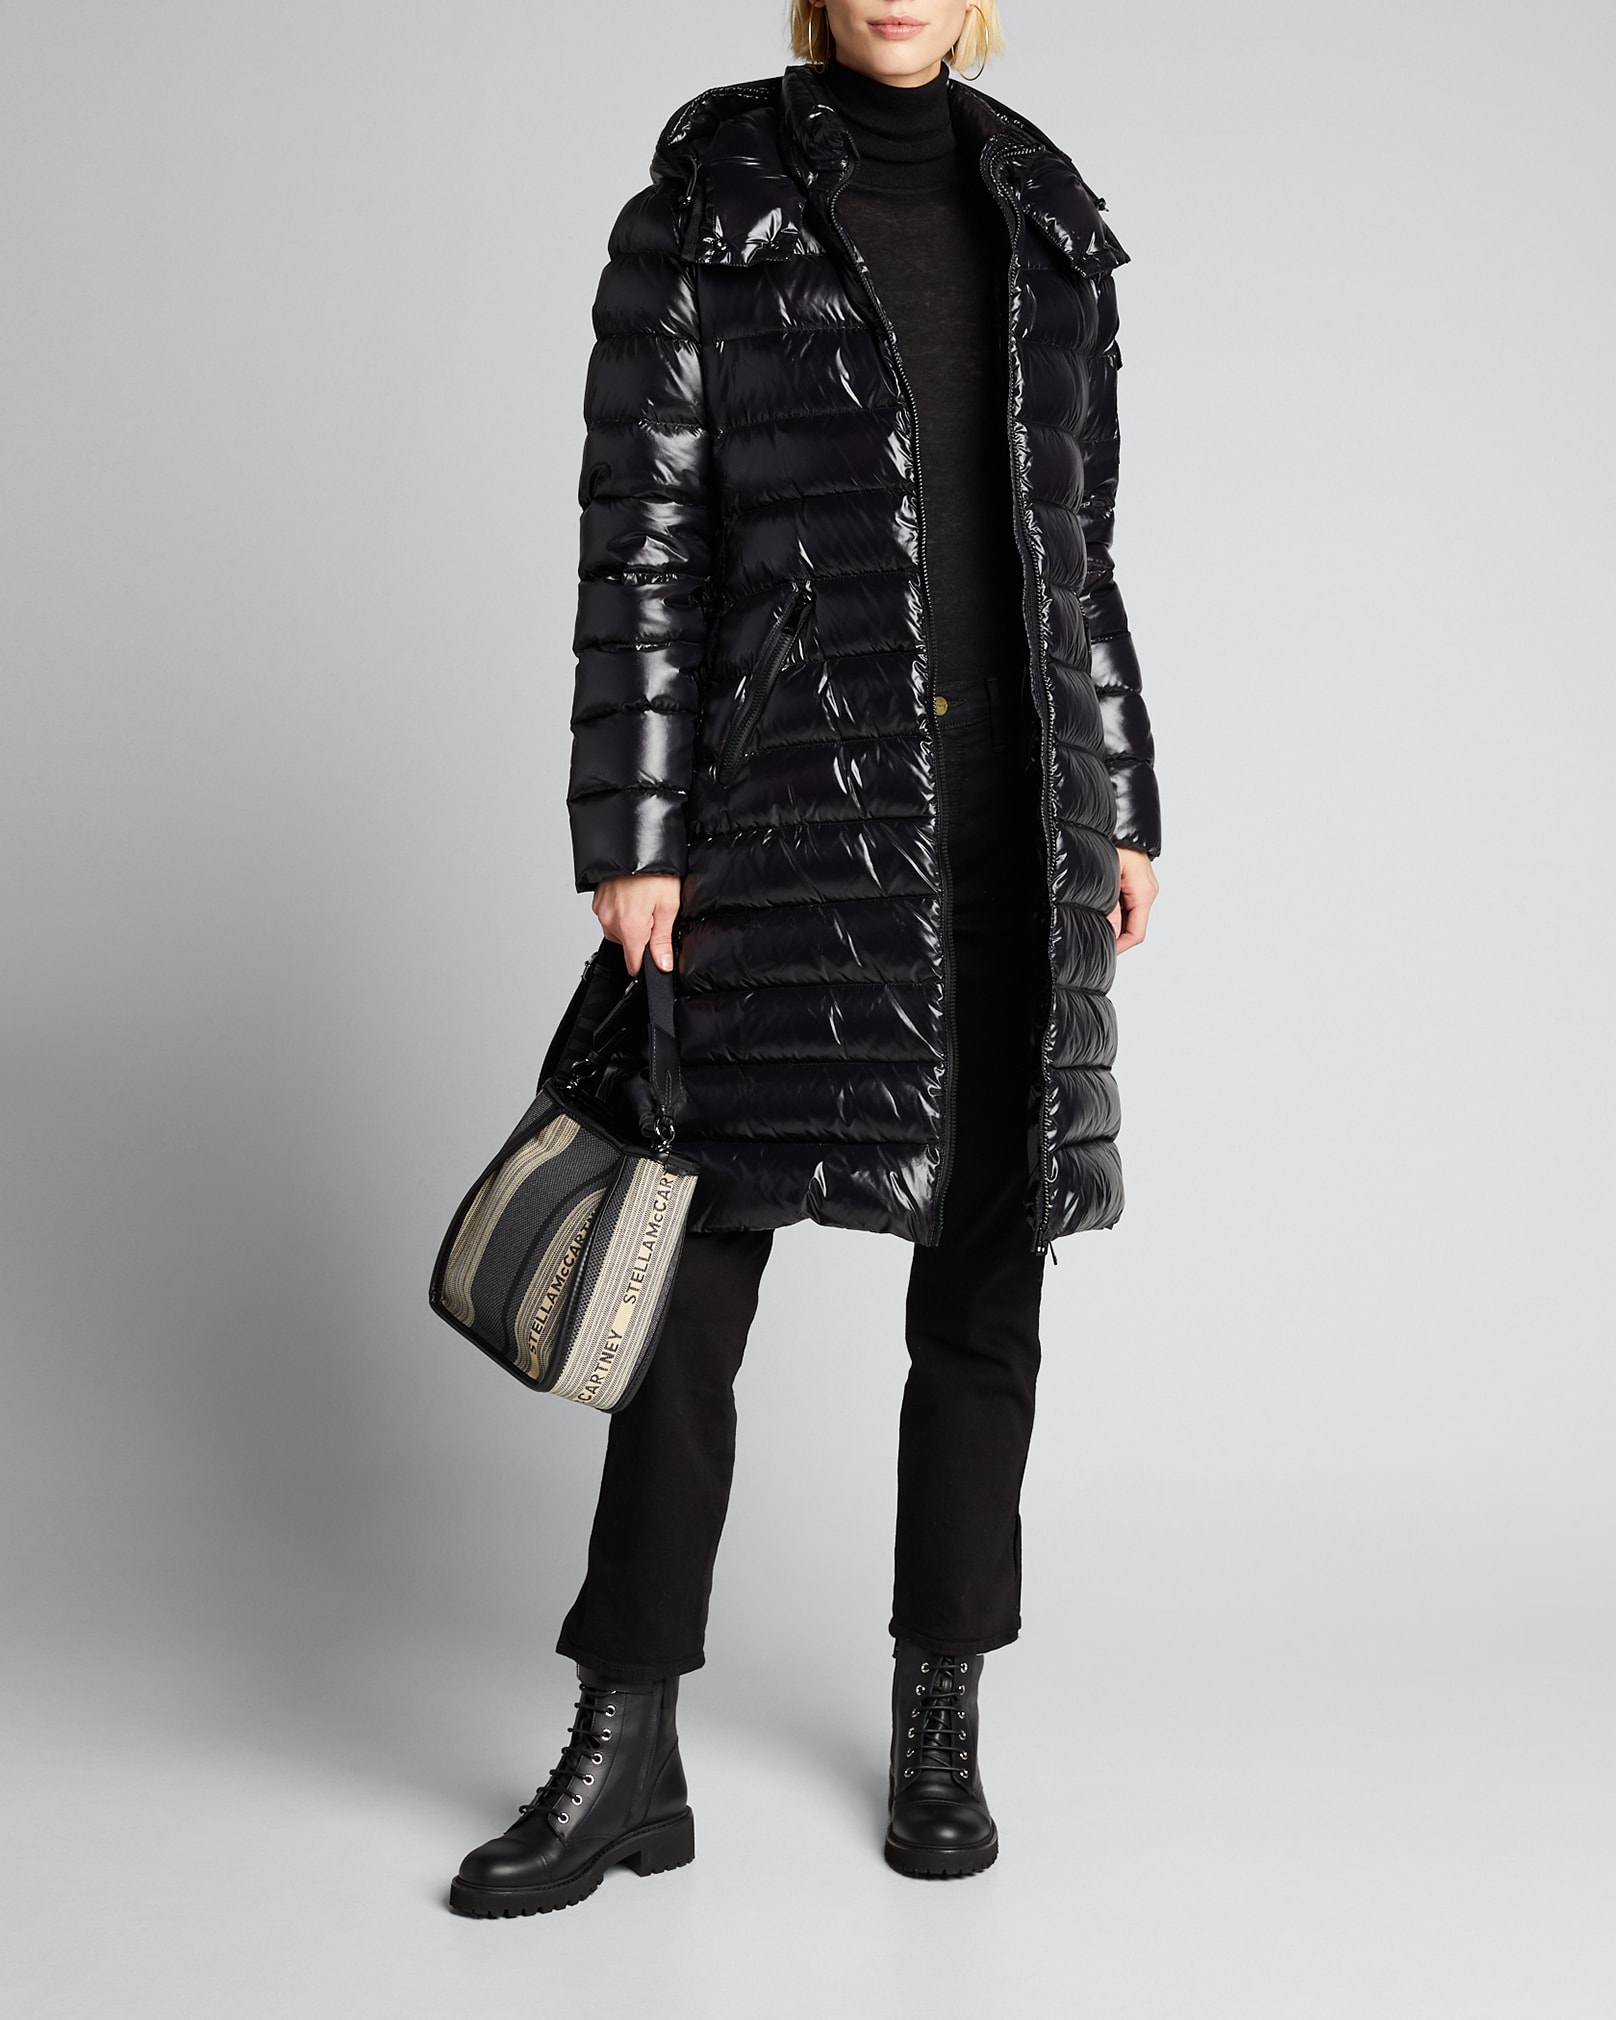 Moncler Moka Shiny Fitted Puffer Coat with Hood - Bergdorf Goodman